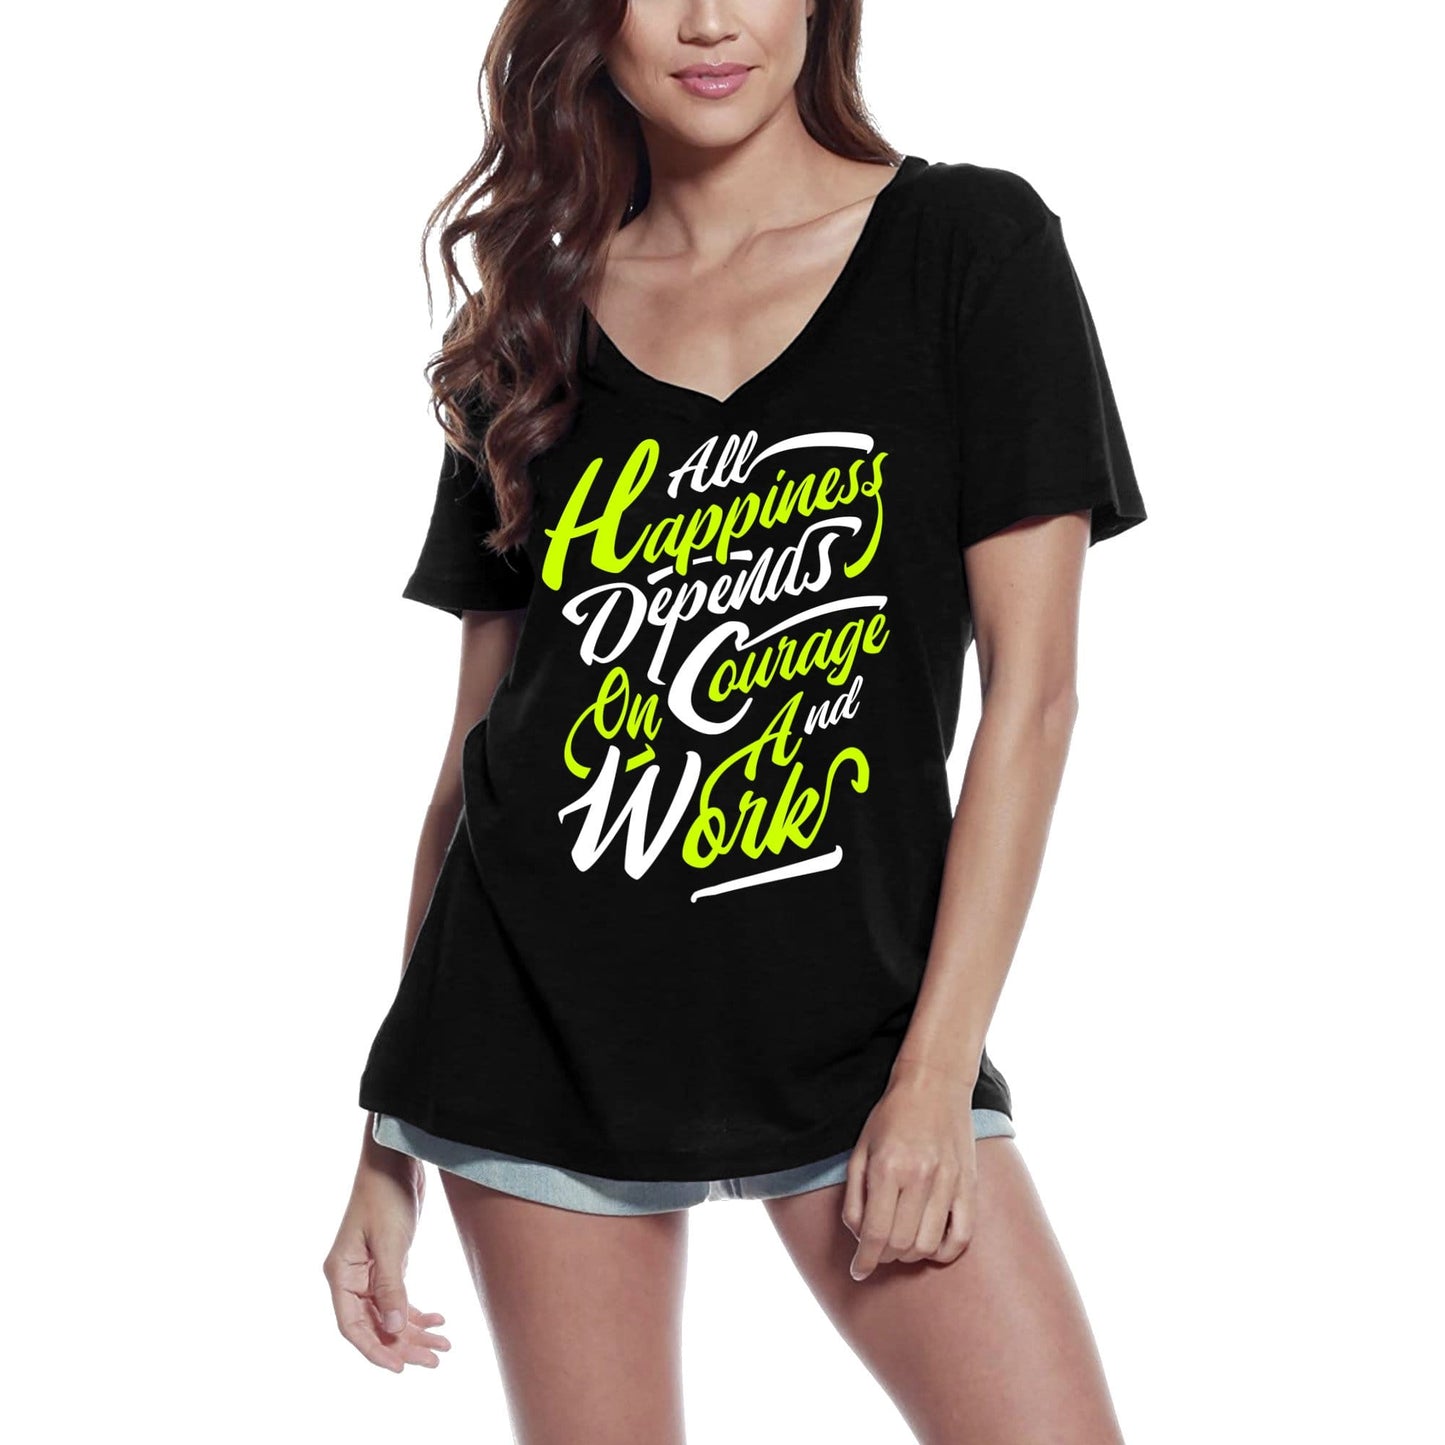 ULTRABASIC Women's T-Shirt Happiness Depends on Courage and Work